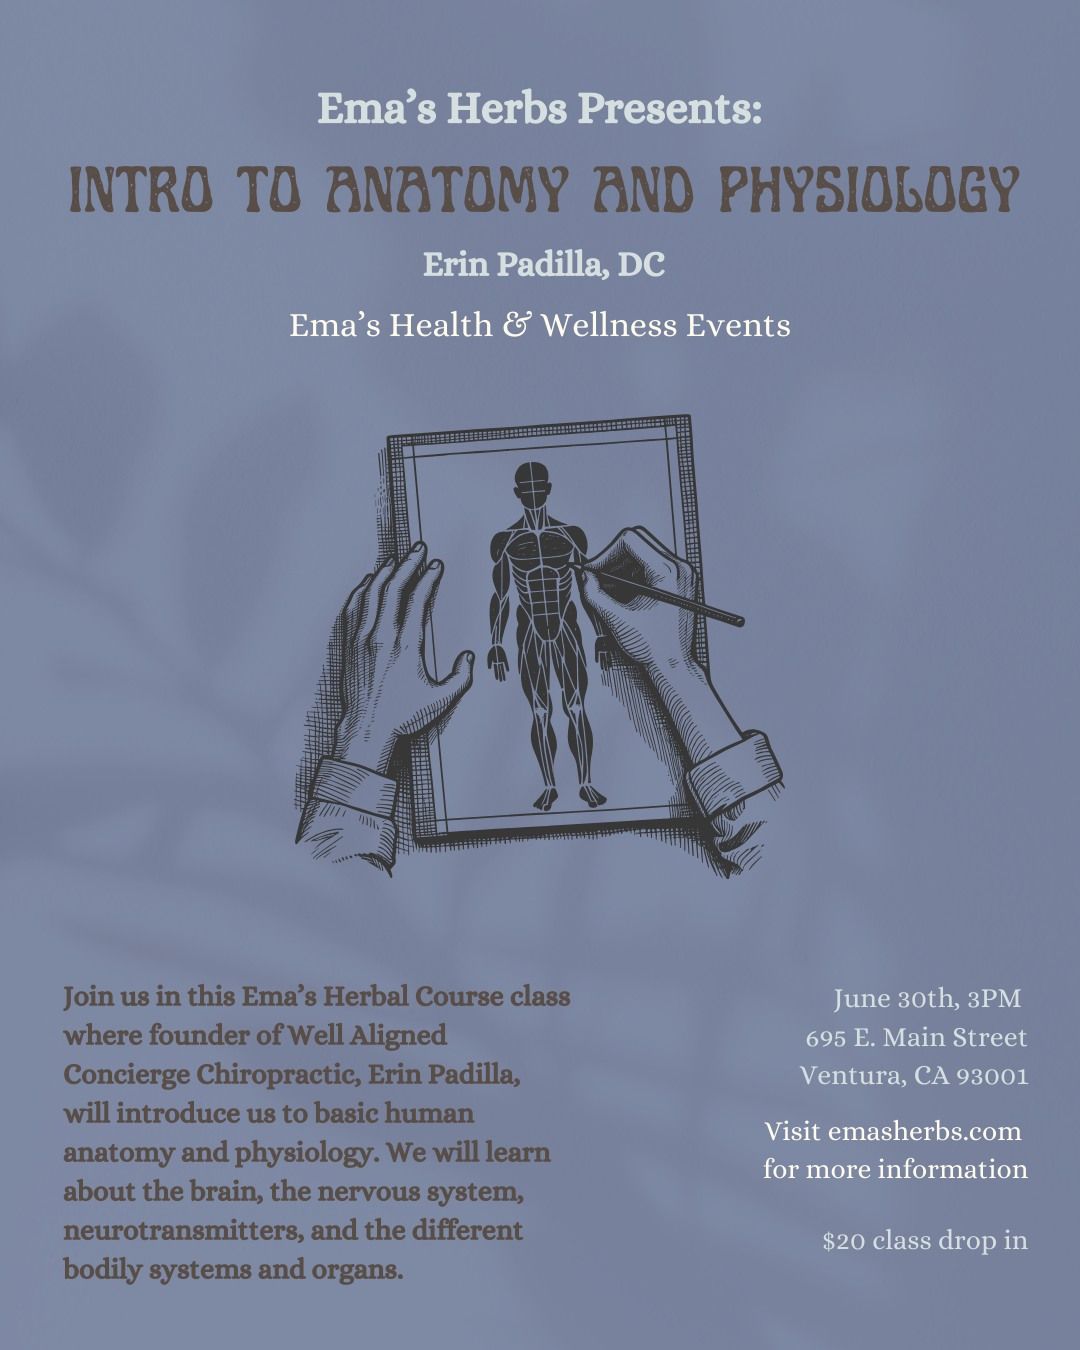 An Introduction to Anatomy & Physiology with Erin Padilla, DC